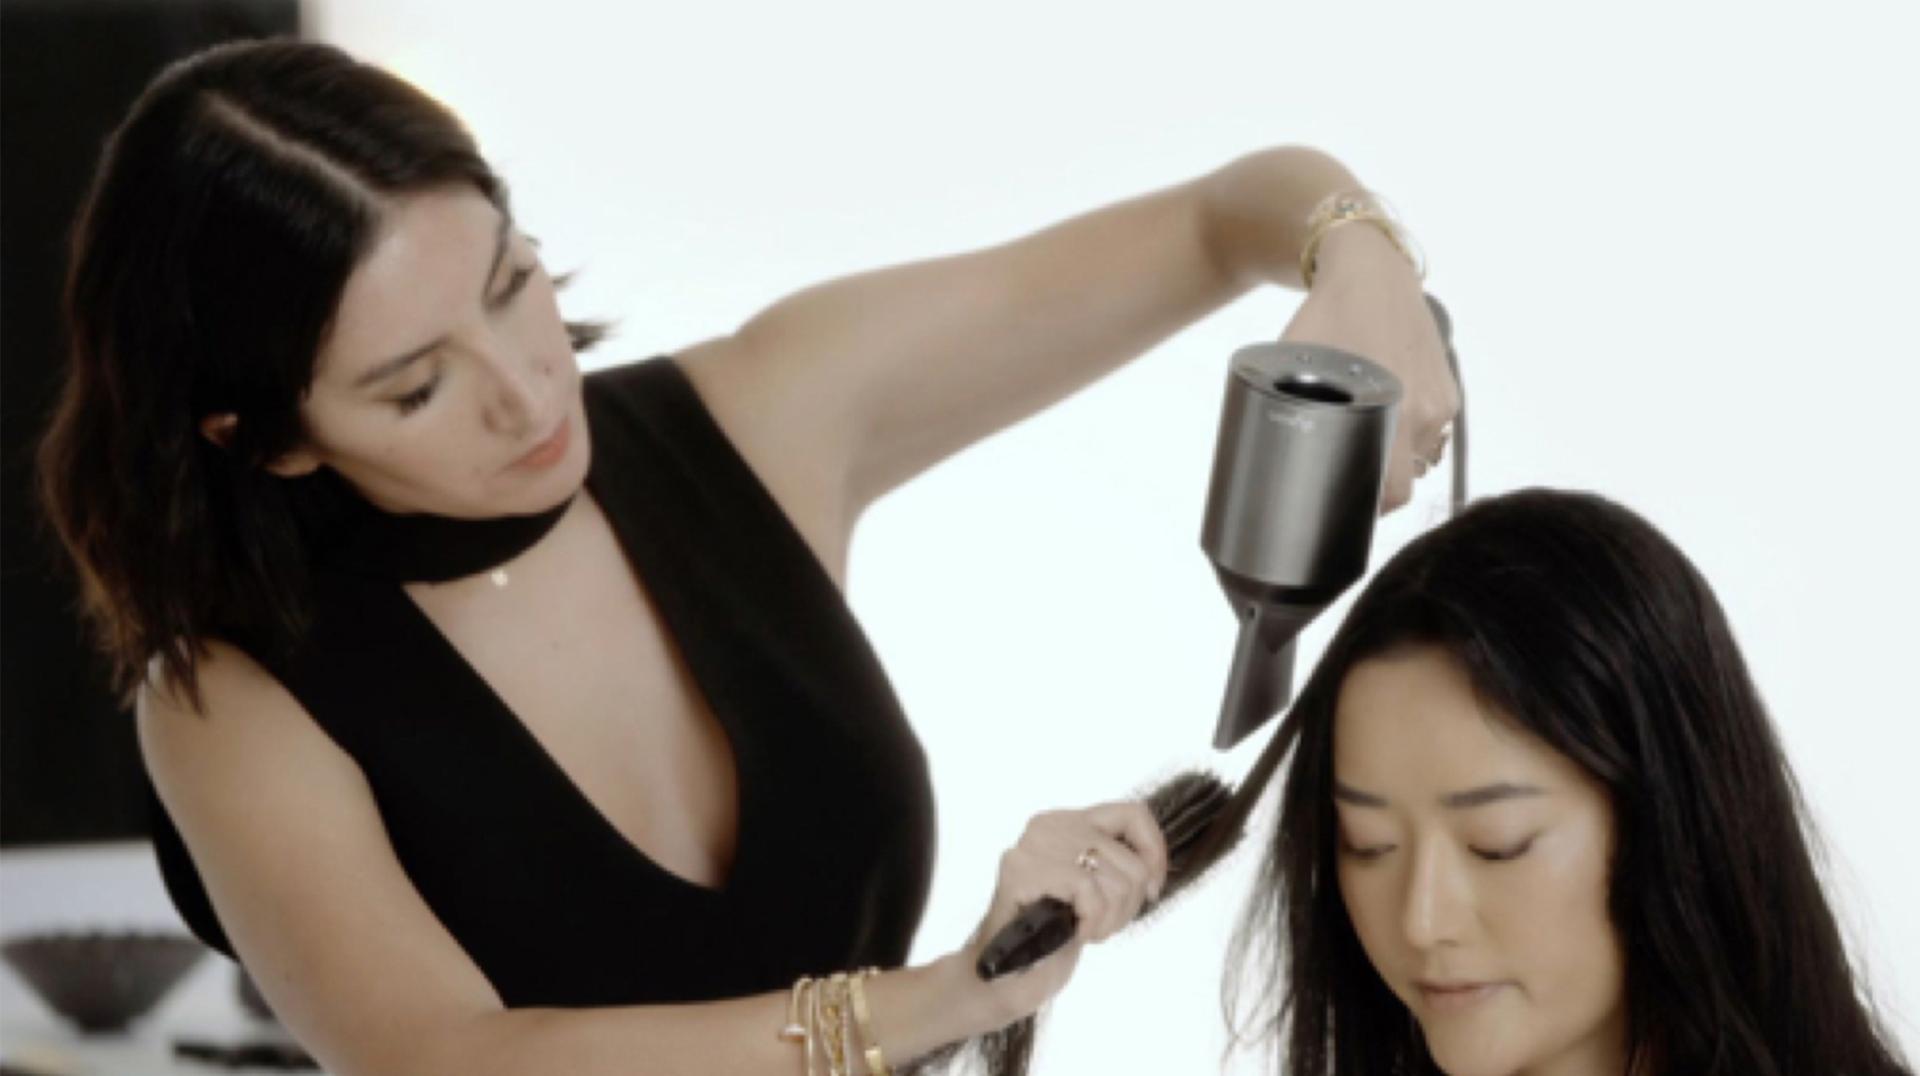 Professional hair stylist using the Dyson Supersonic hair dryer on a customer